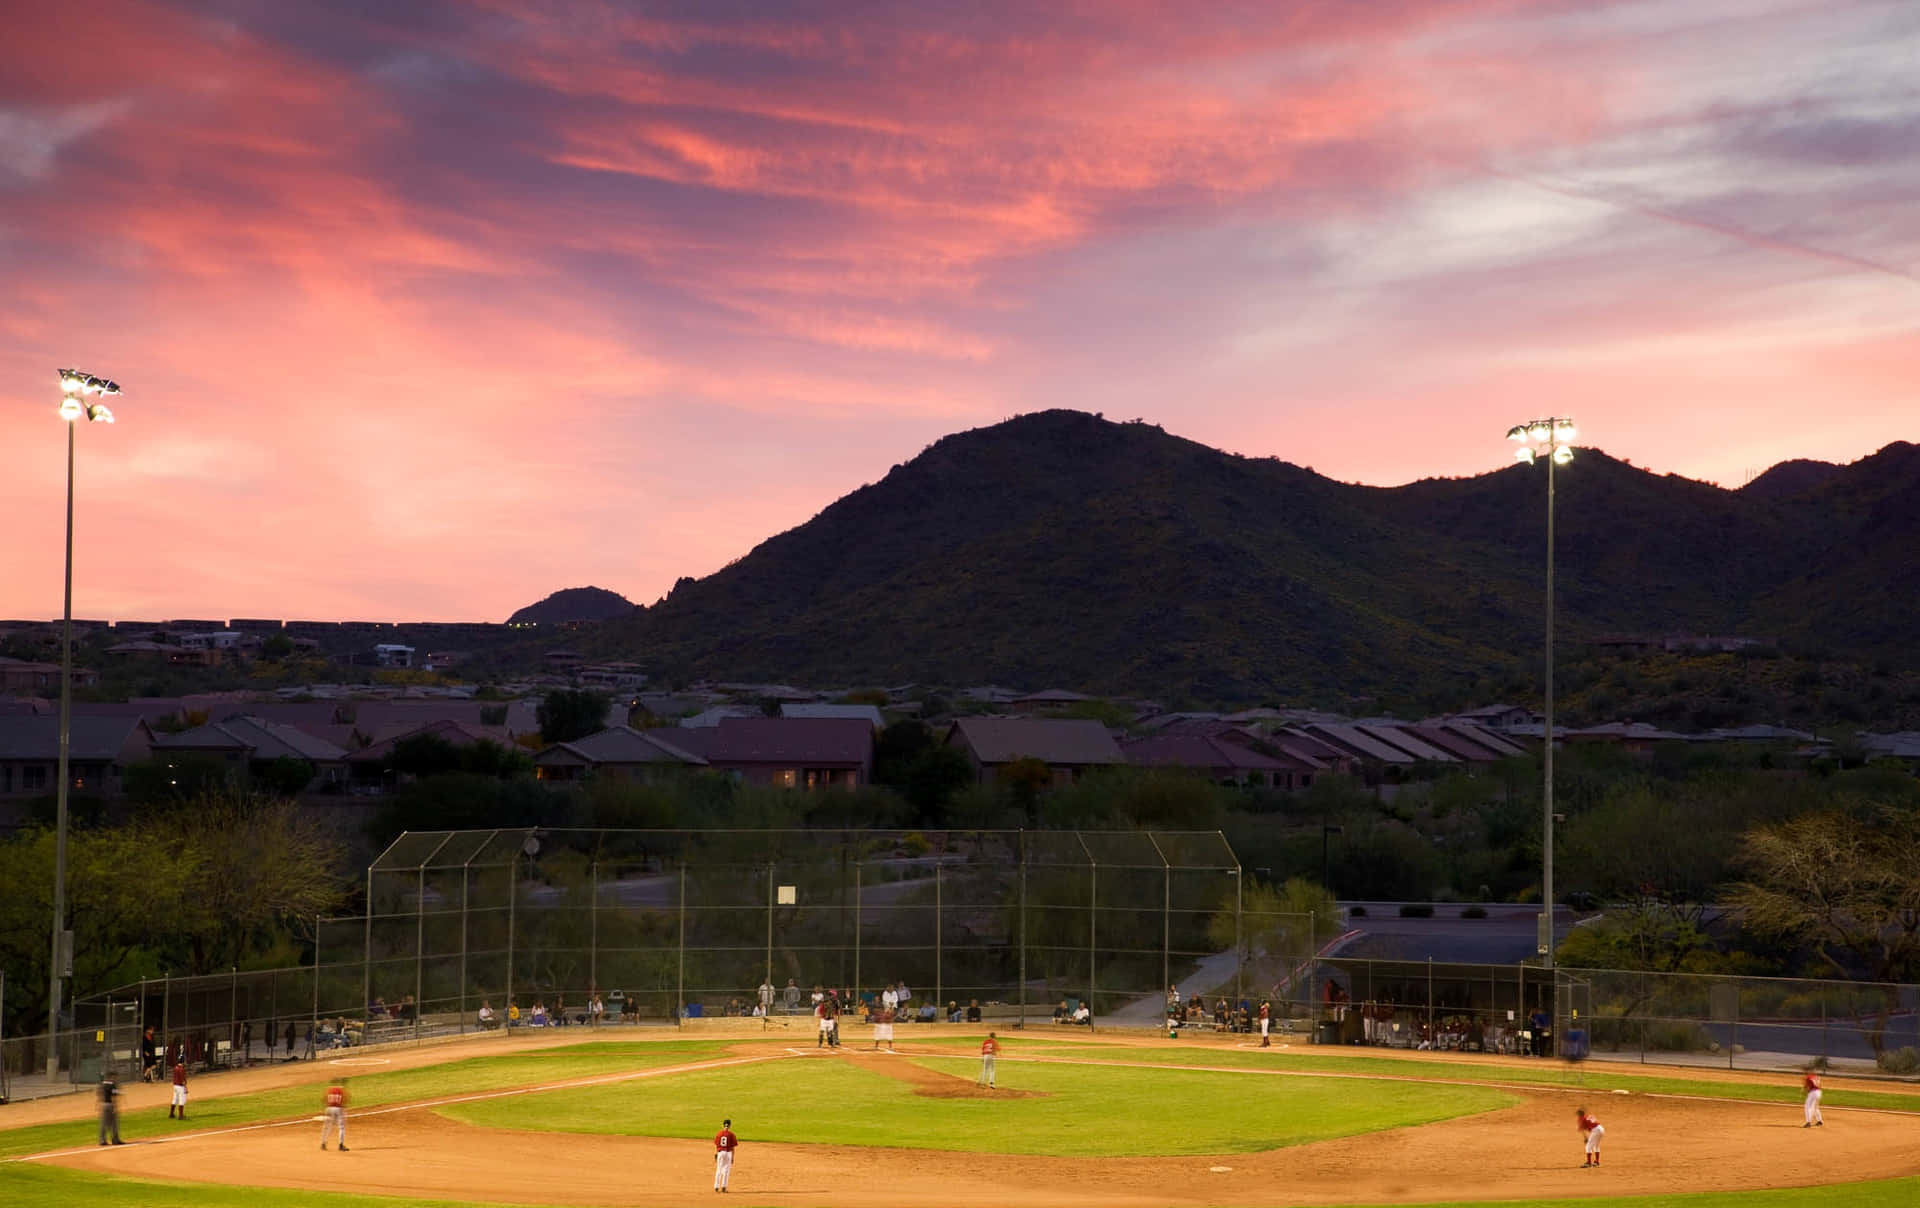 Enjoy A Game On The Perfect Baseball Field